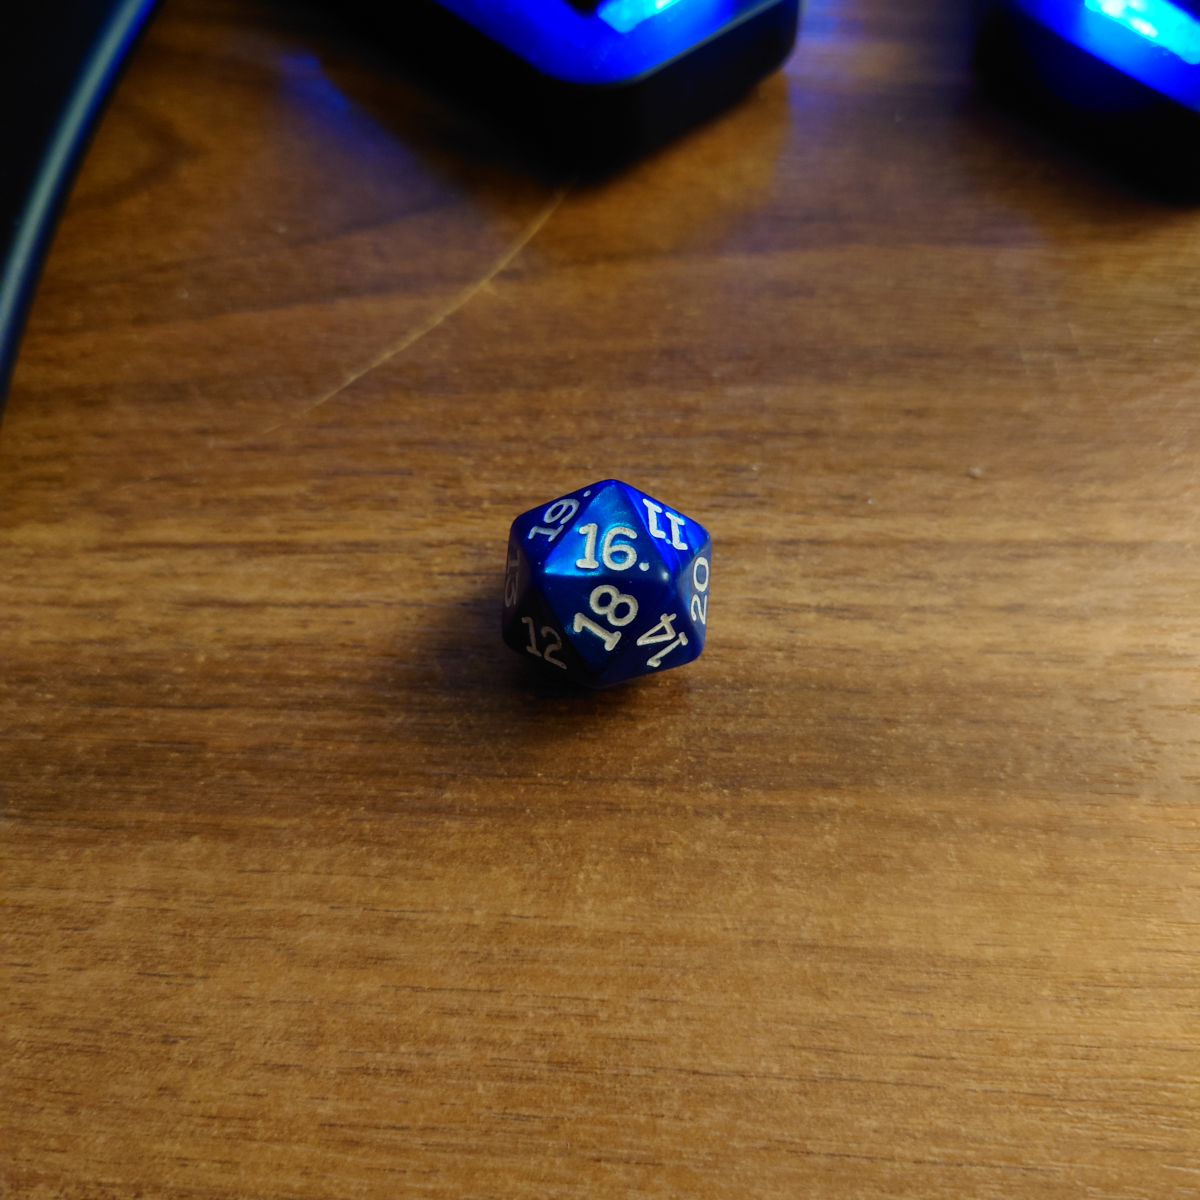 A picture of a 20 sided dice with the number 16 on the upper face.